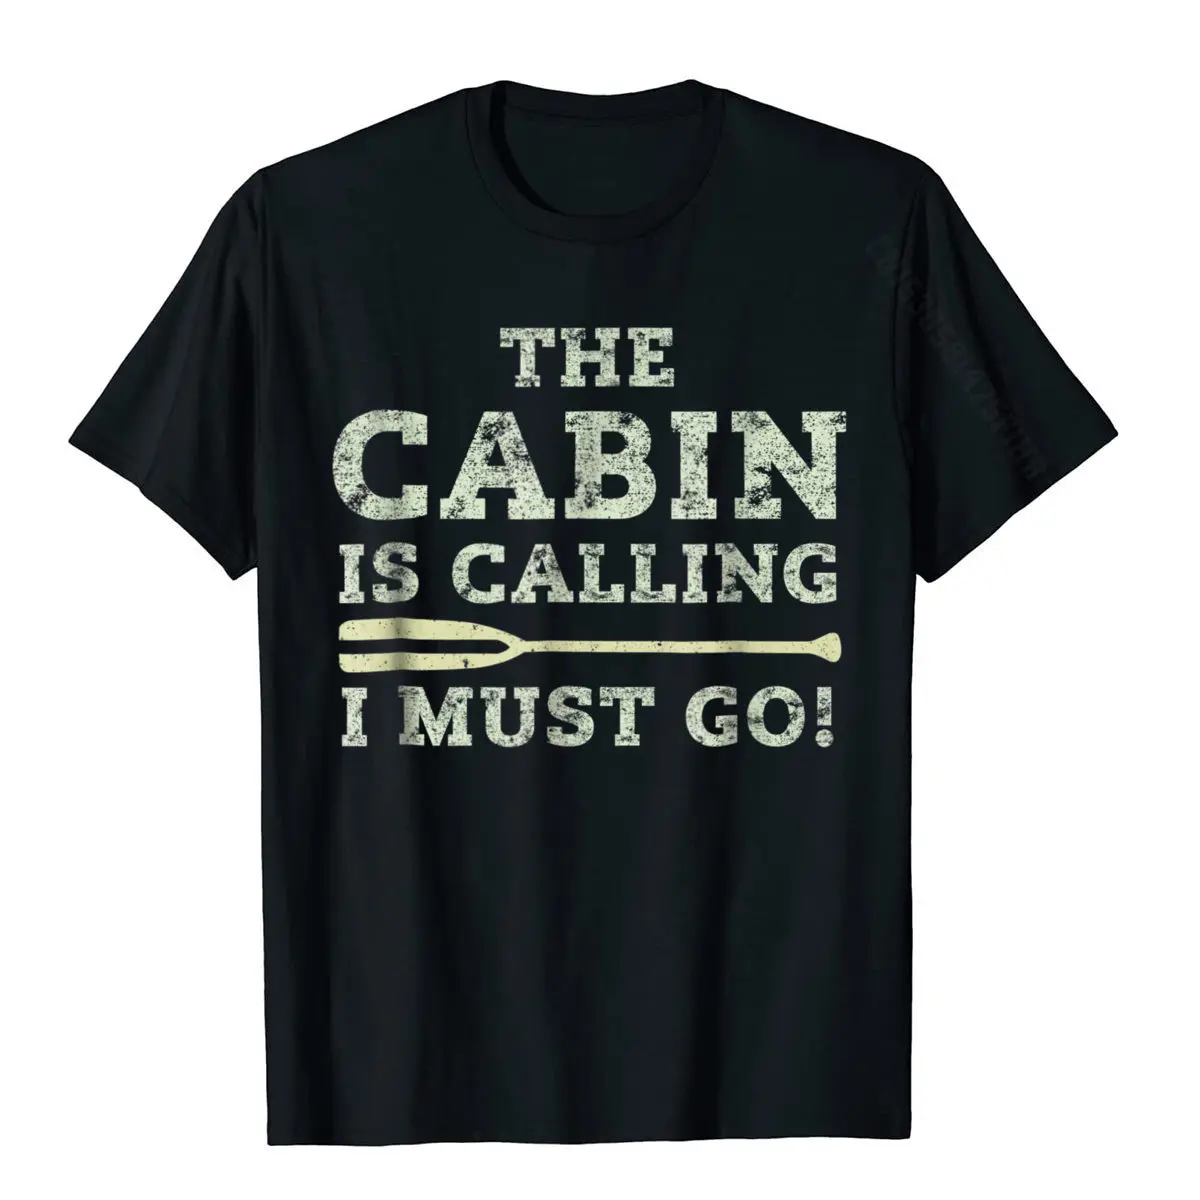 Cute The Cabin Is Calling I Must Go Funny Cabin T-Shirt Summer Top T-Shirts Prevailing Cotton Men Tops Shirt Street